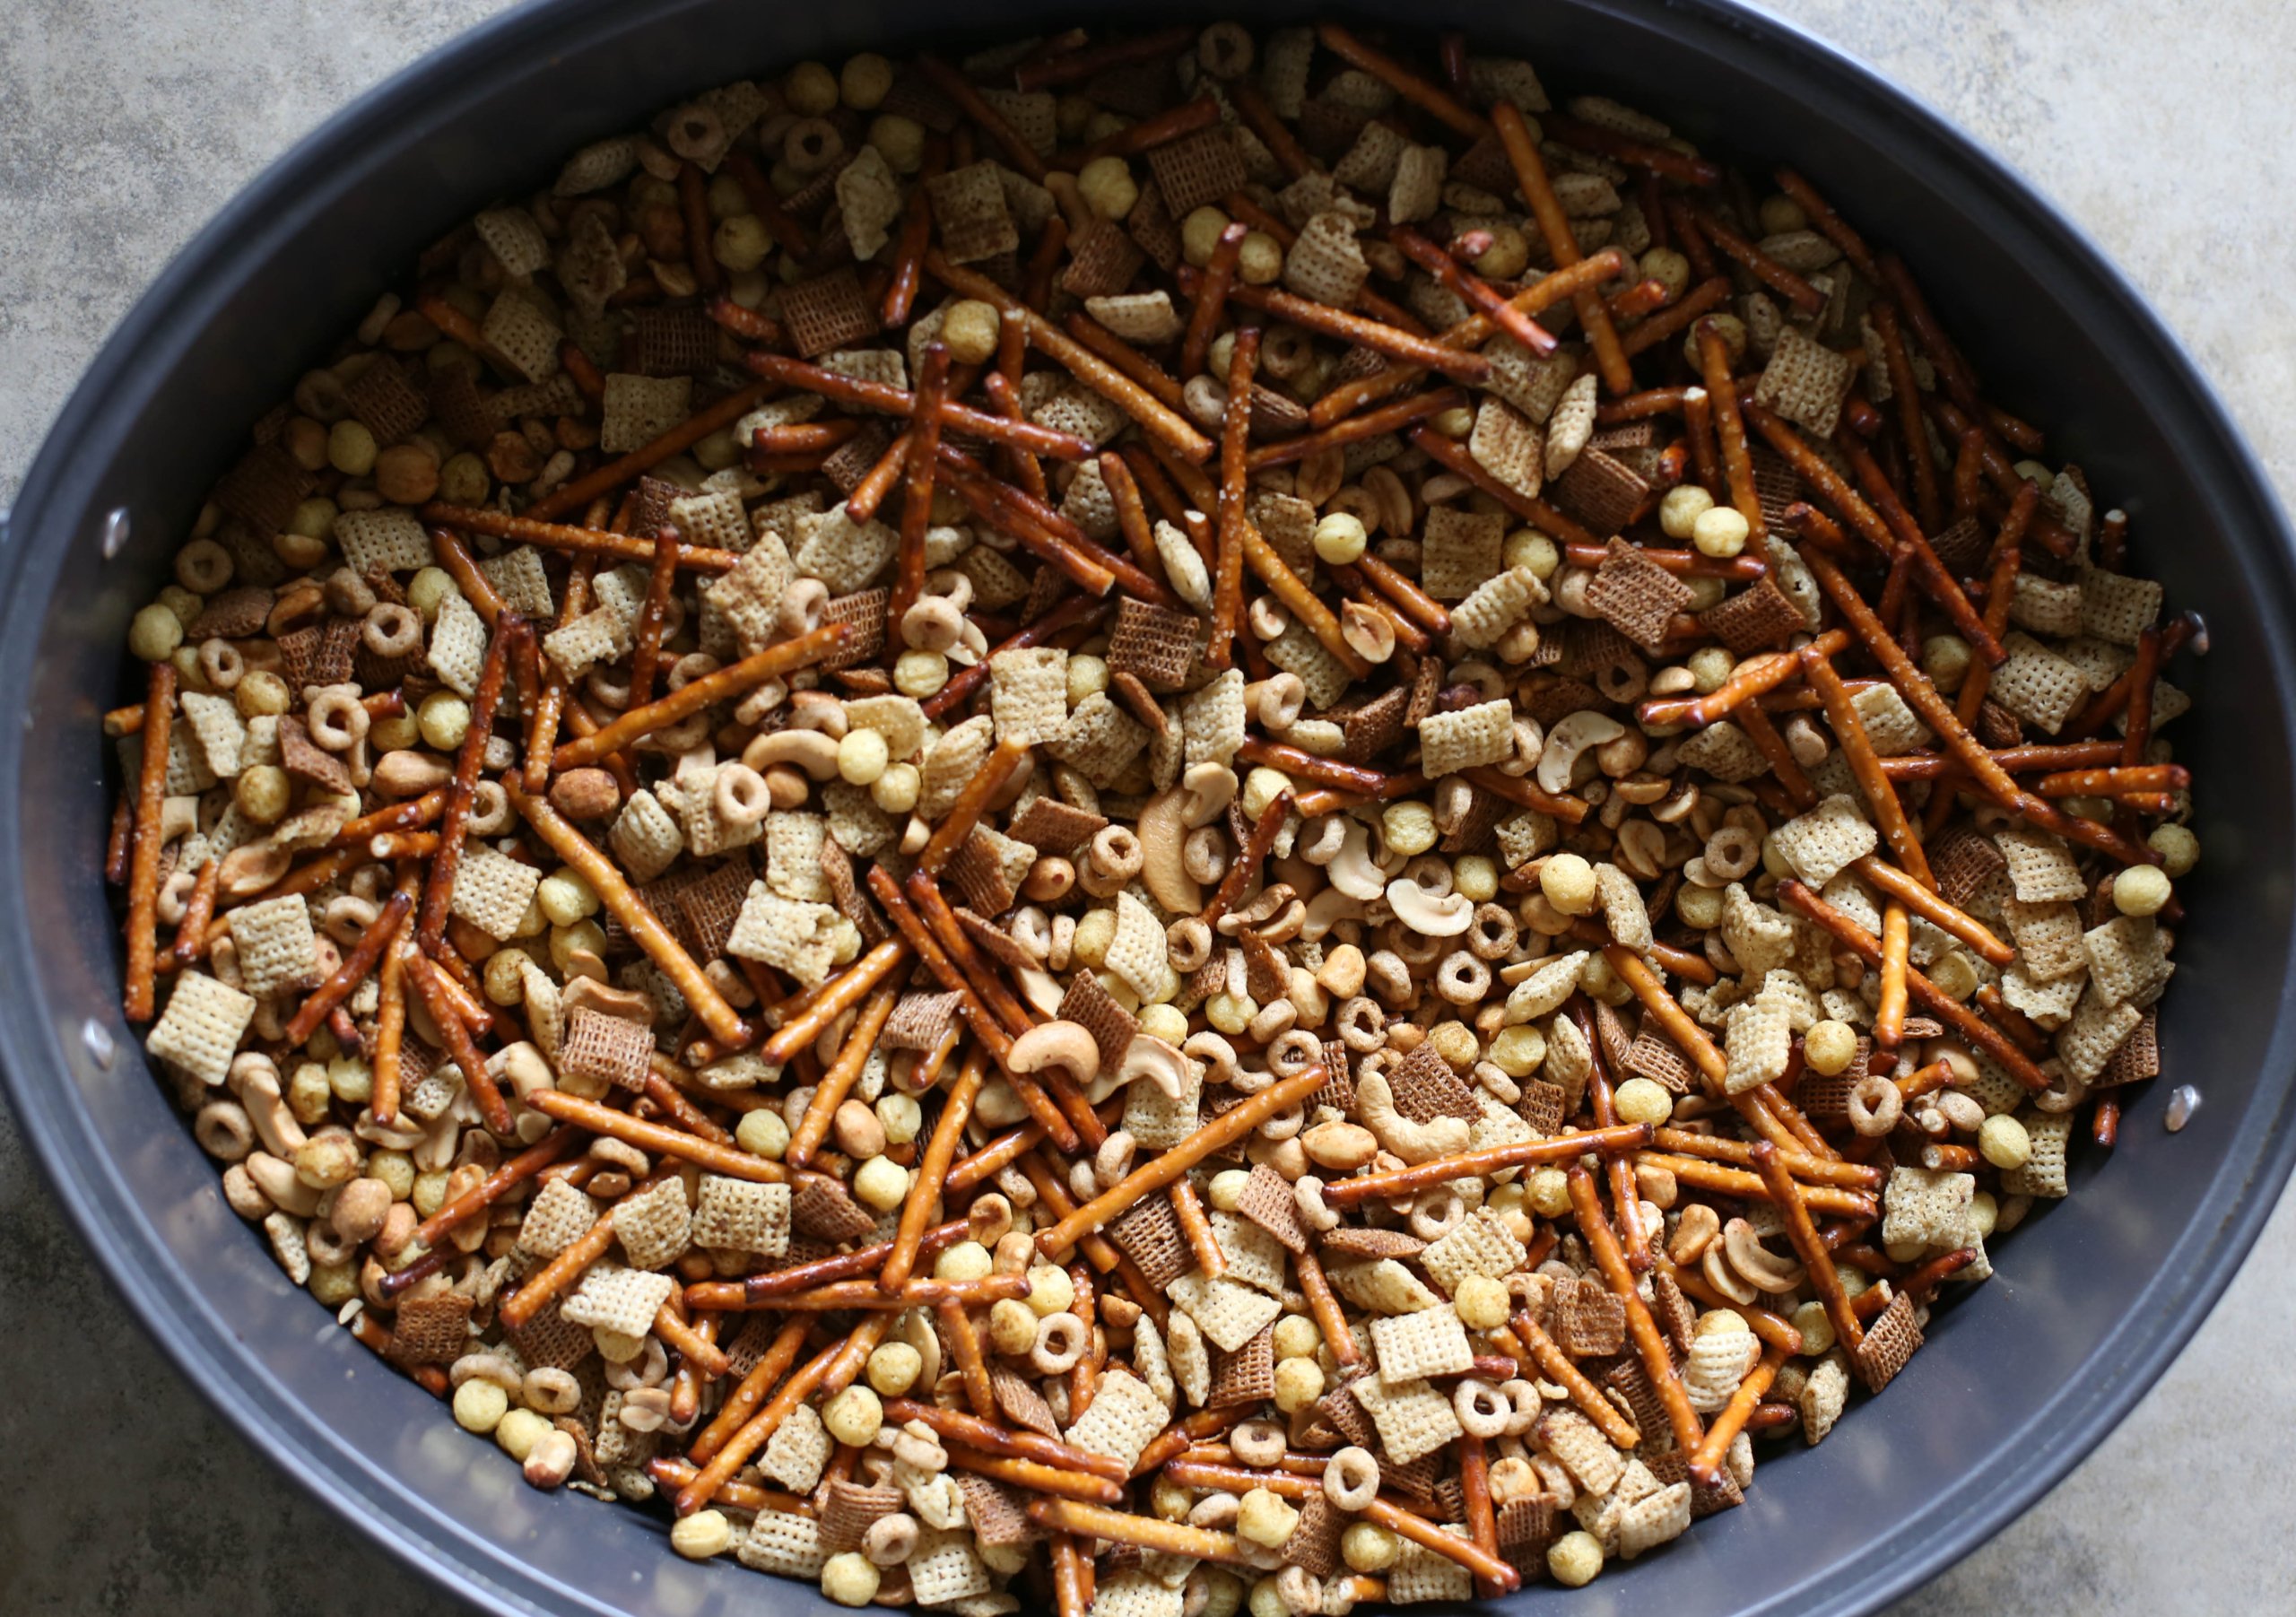 Finished Homemade Chex Mix in a large roasting pan ready to be dished out.